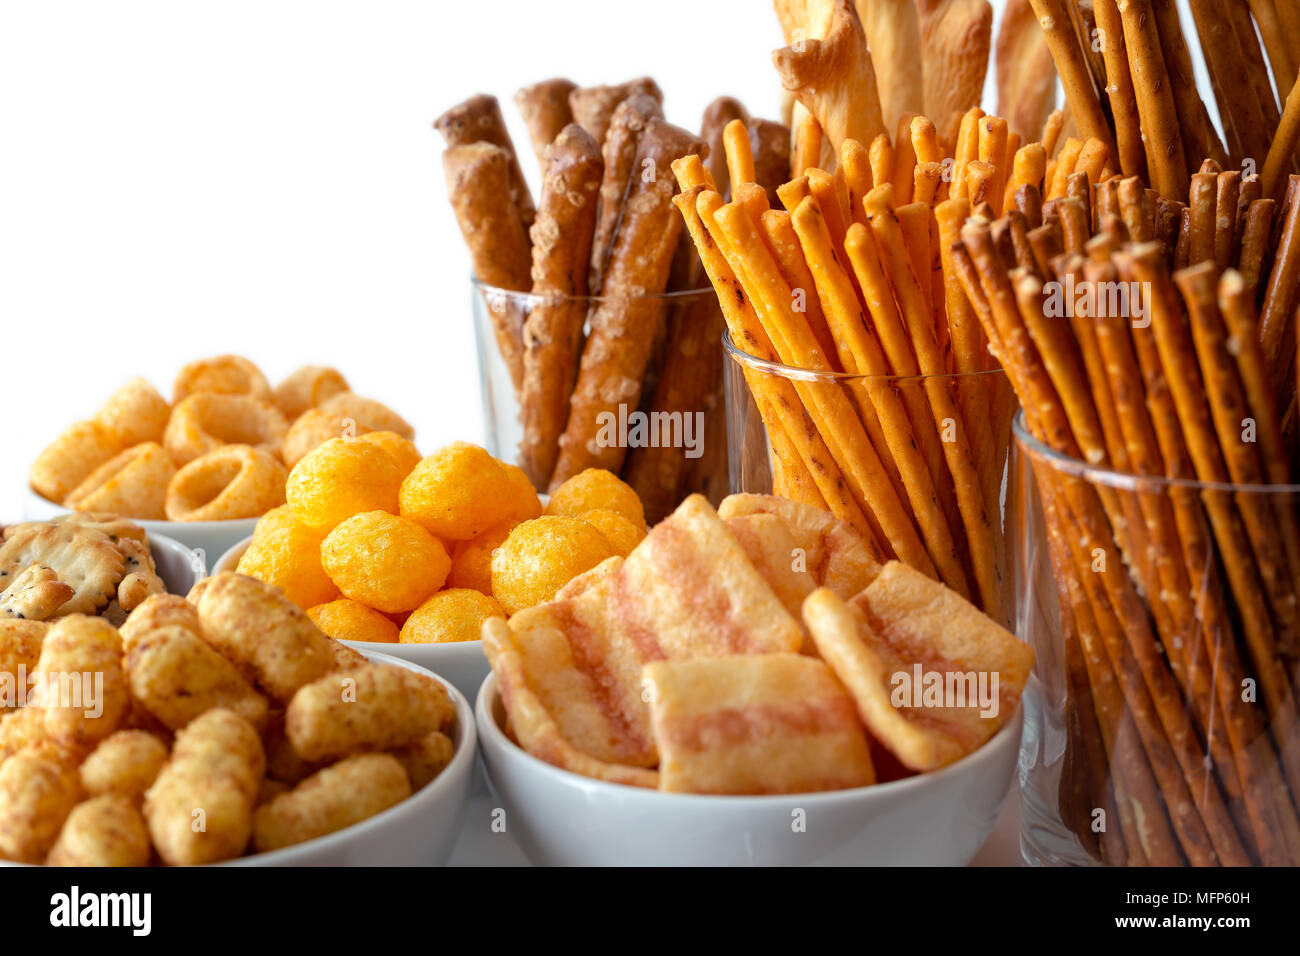 Selection of many types of savory snacks in white ceramic dishes and glasses. Stock Photo